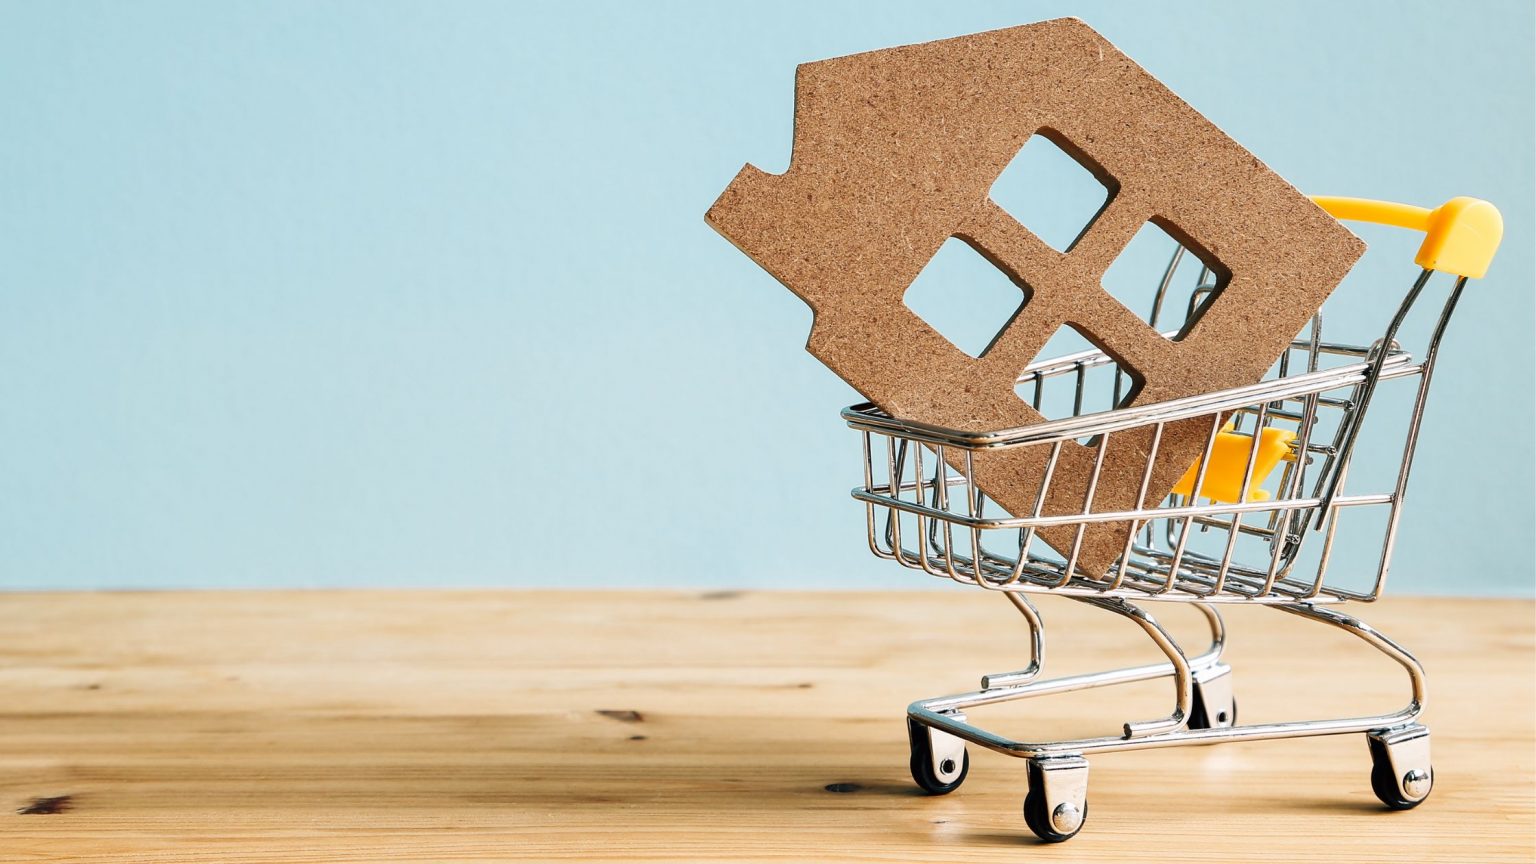 House in shopping cart as mortgage purchase activity has increased ahead of spring buying season.